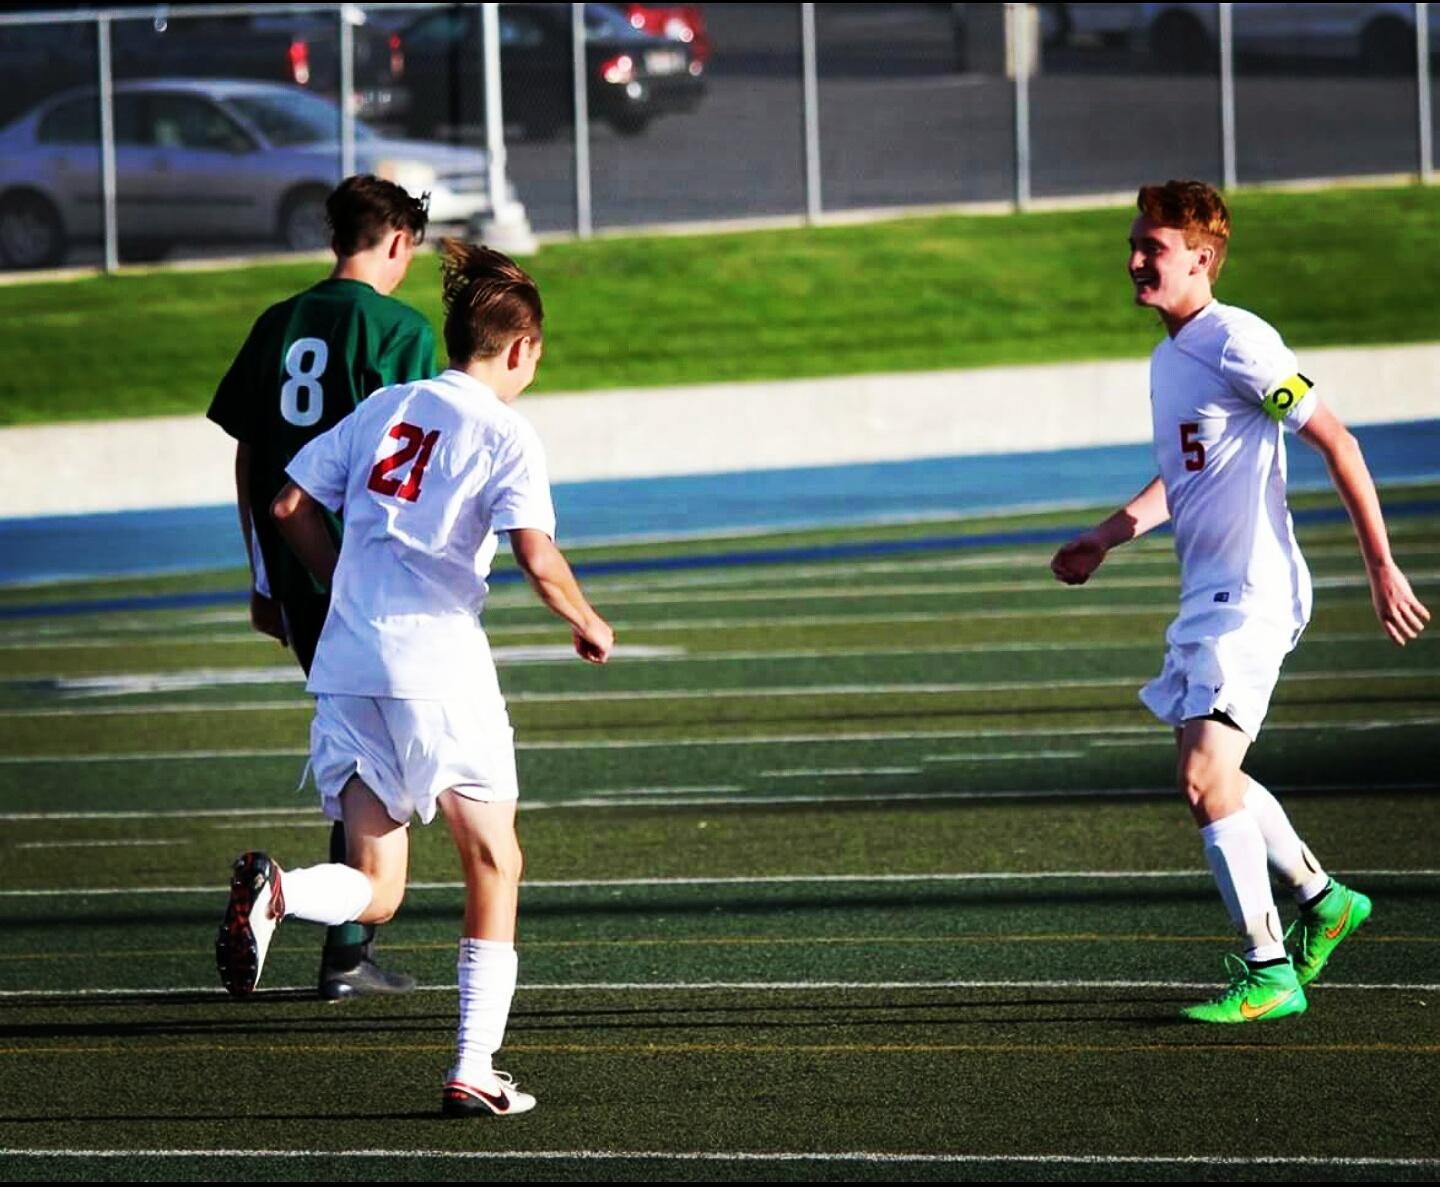 Hunter Clay participates in a soccer game Courtesy Photo by Hunter Clay